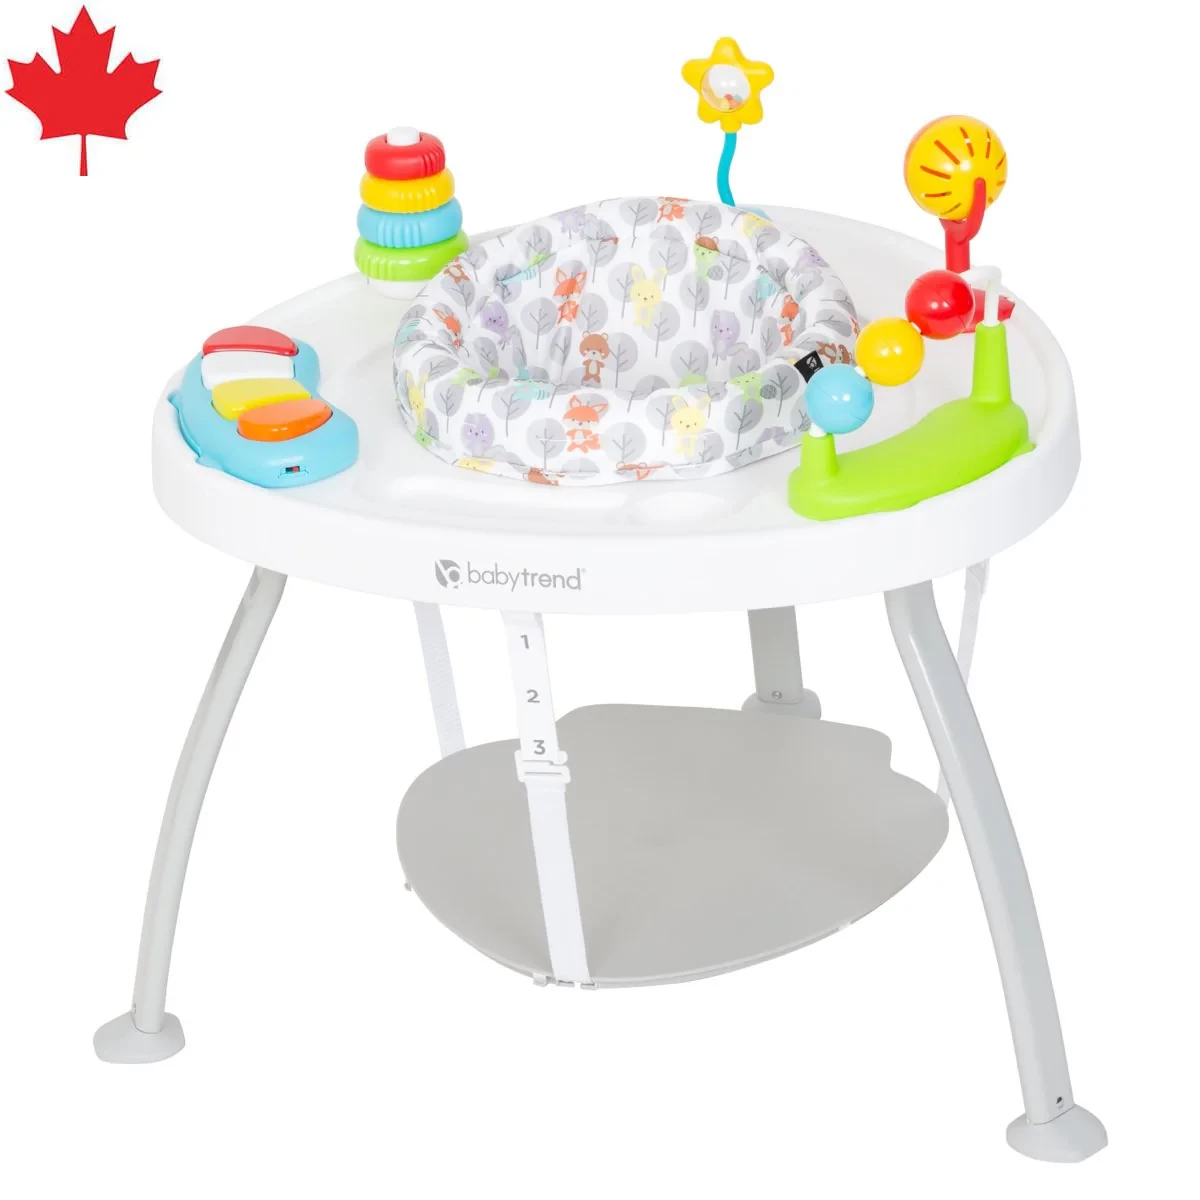 3-in-1 Bounce N Play Activity Center - Woodland Walk